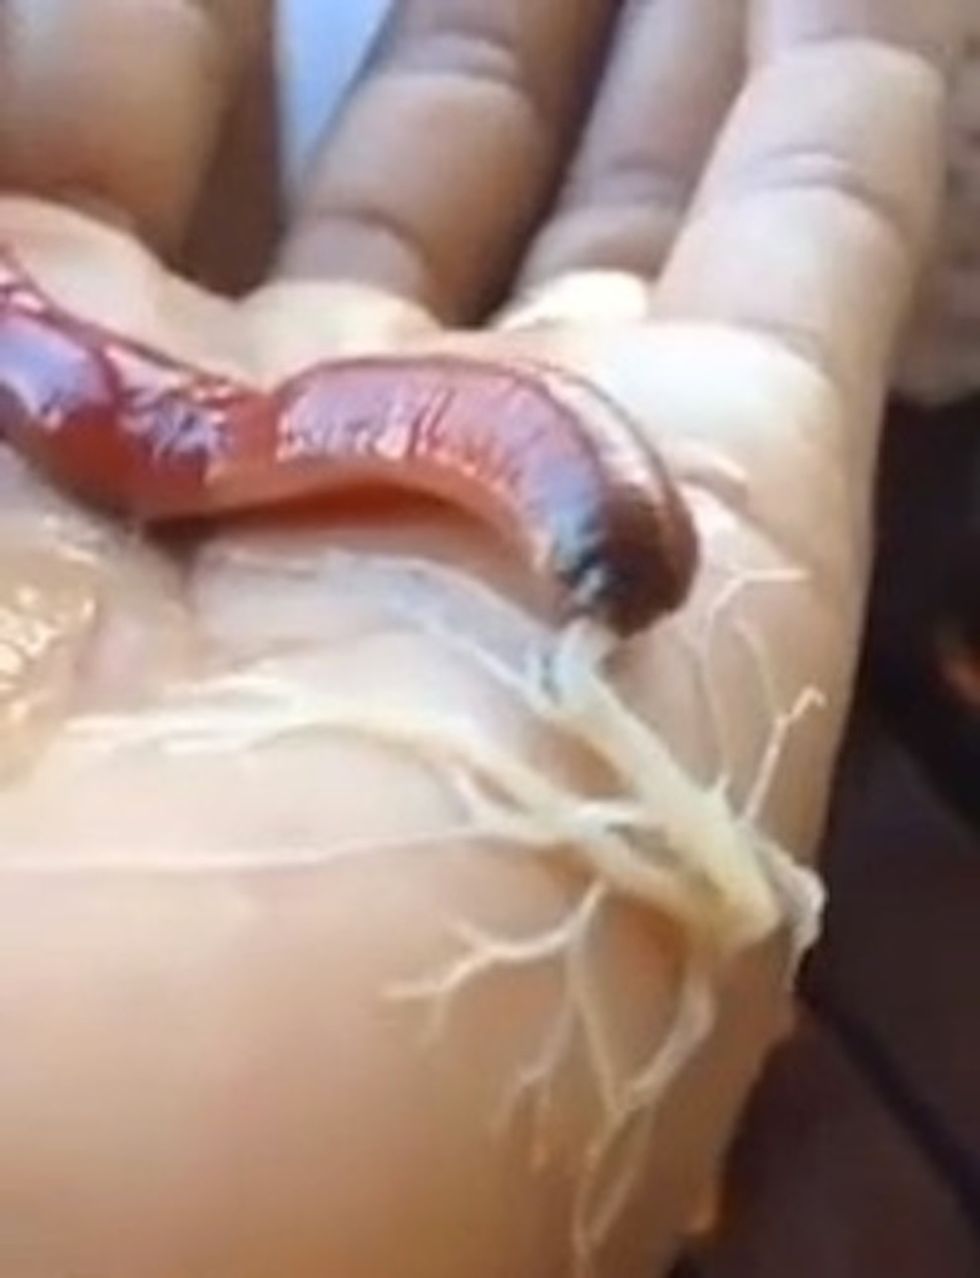 This May Be the Most Disgusting Video of a Worm You've Ever Seen